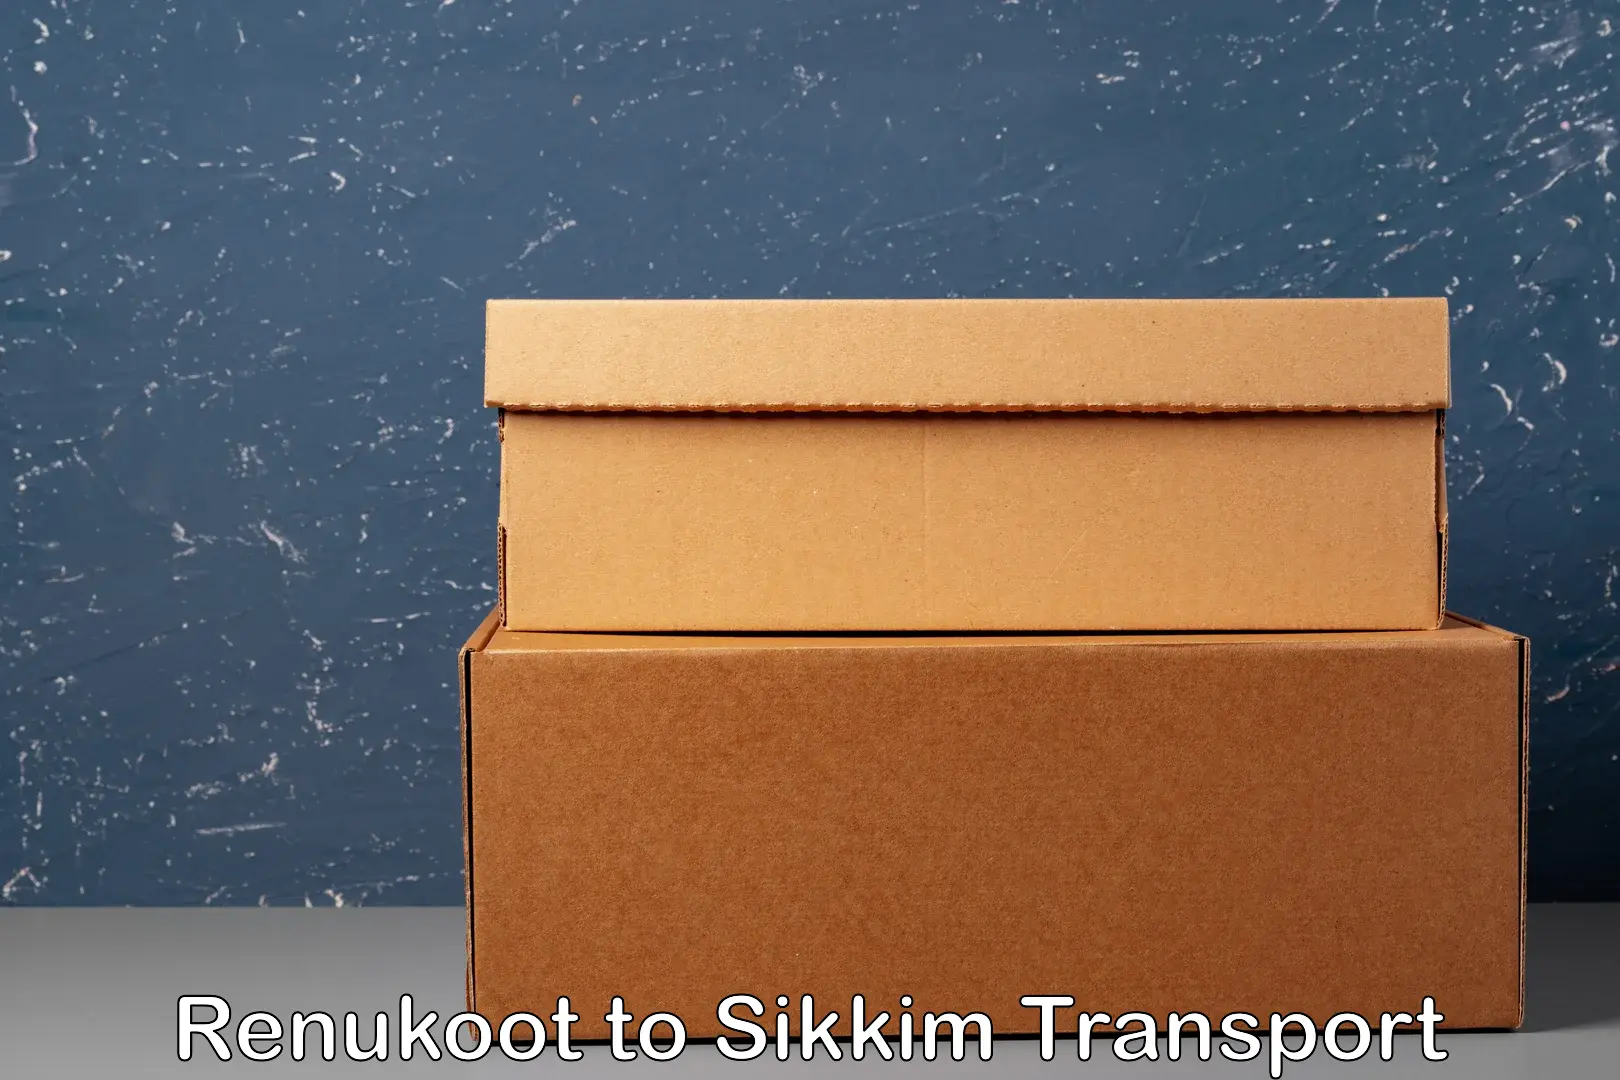 Cycle transportation service Renukoot to Sikkim